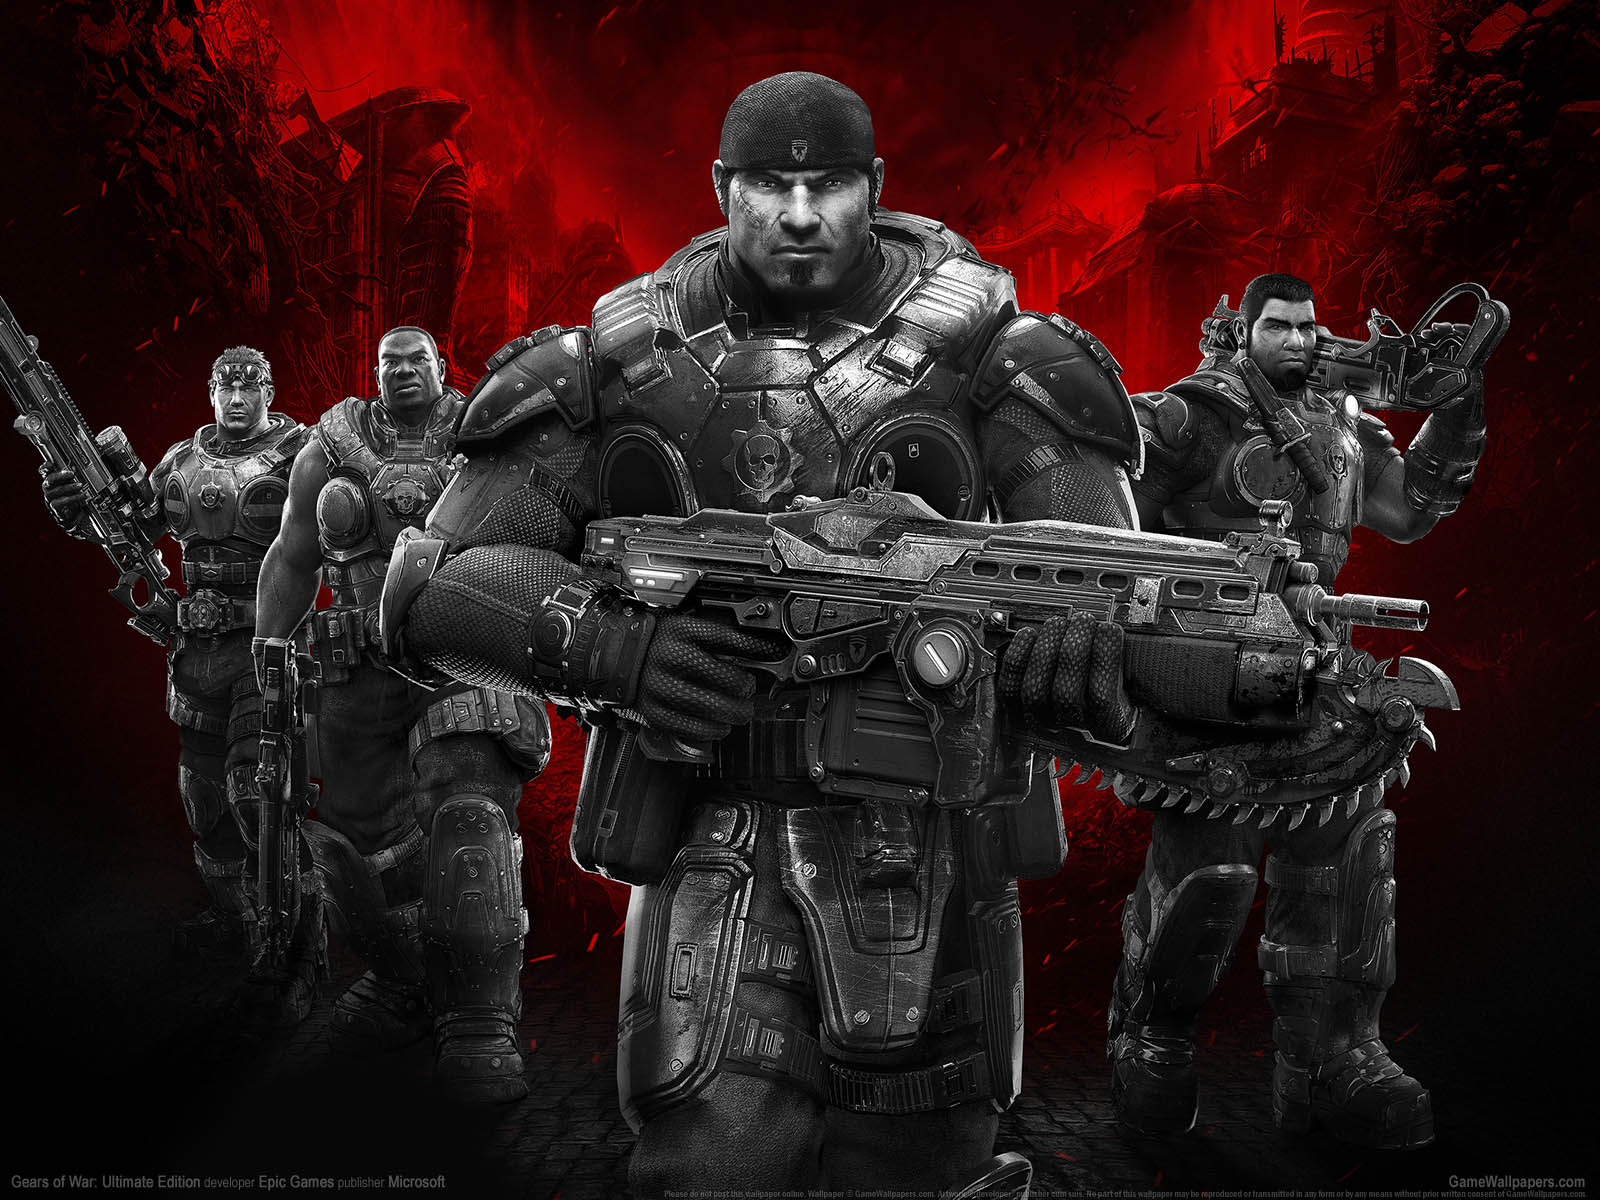 Gears of War%3A Ultimate Edition achtergrond 01 1600x1200